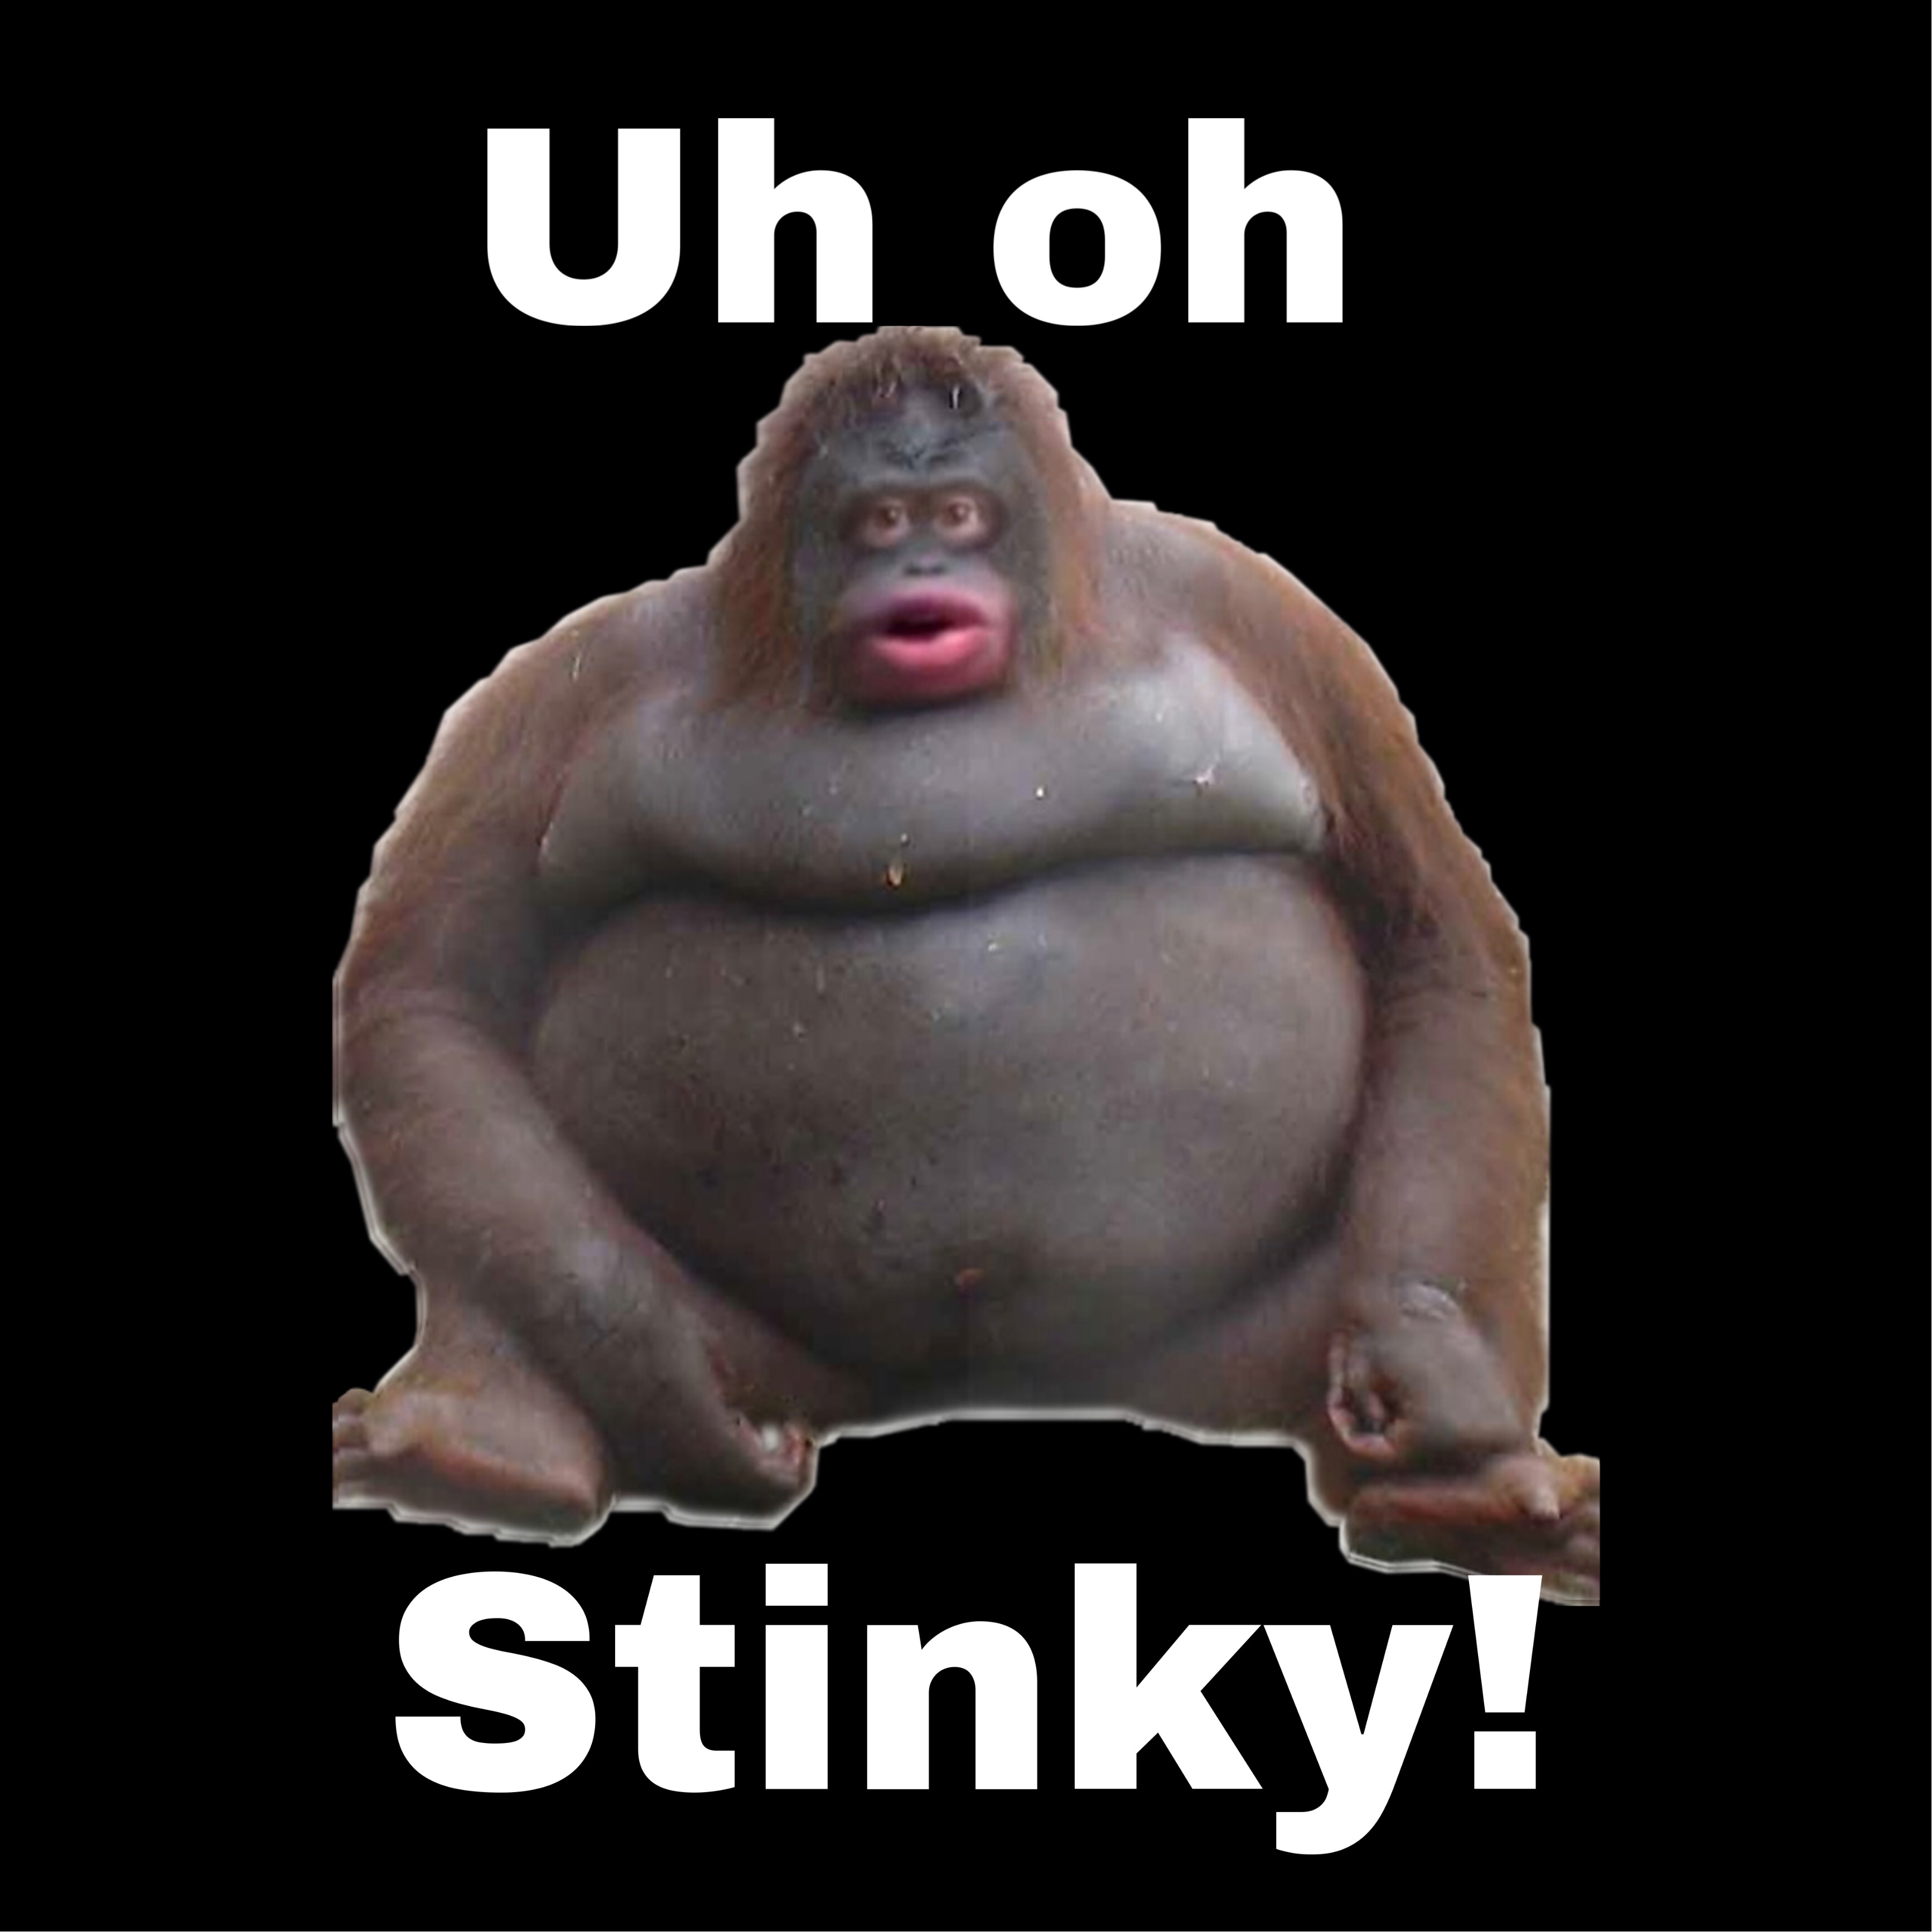 This visual is about freetoedit lemonke uh oh stinky #freetoedit le monke #...